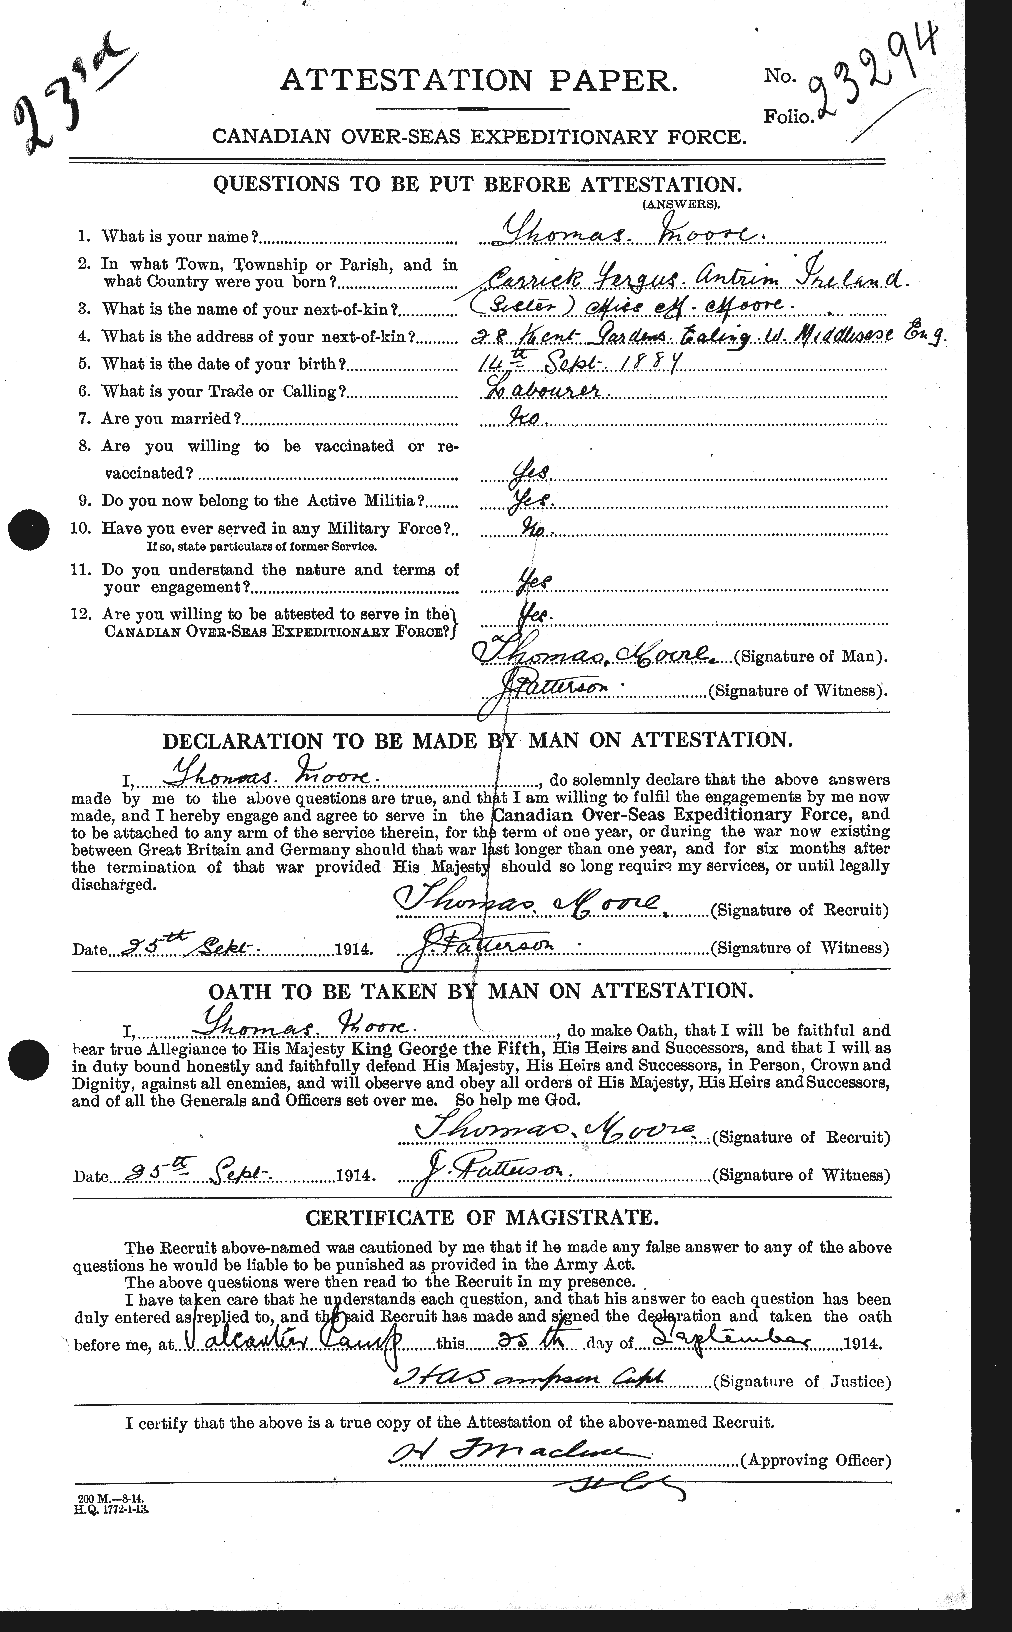 Personnel Records of the First World War - CEF 505620a